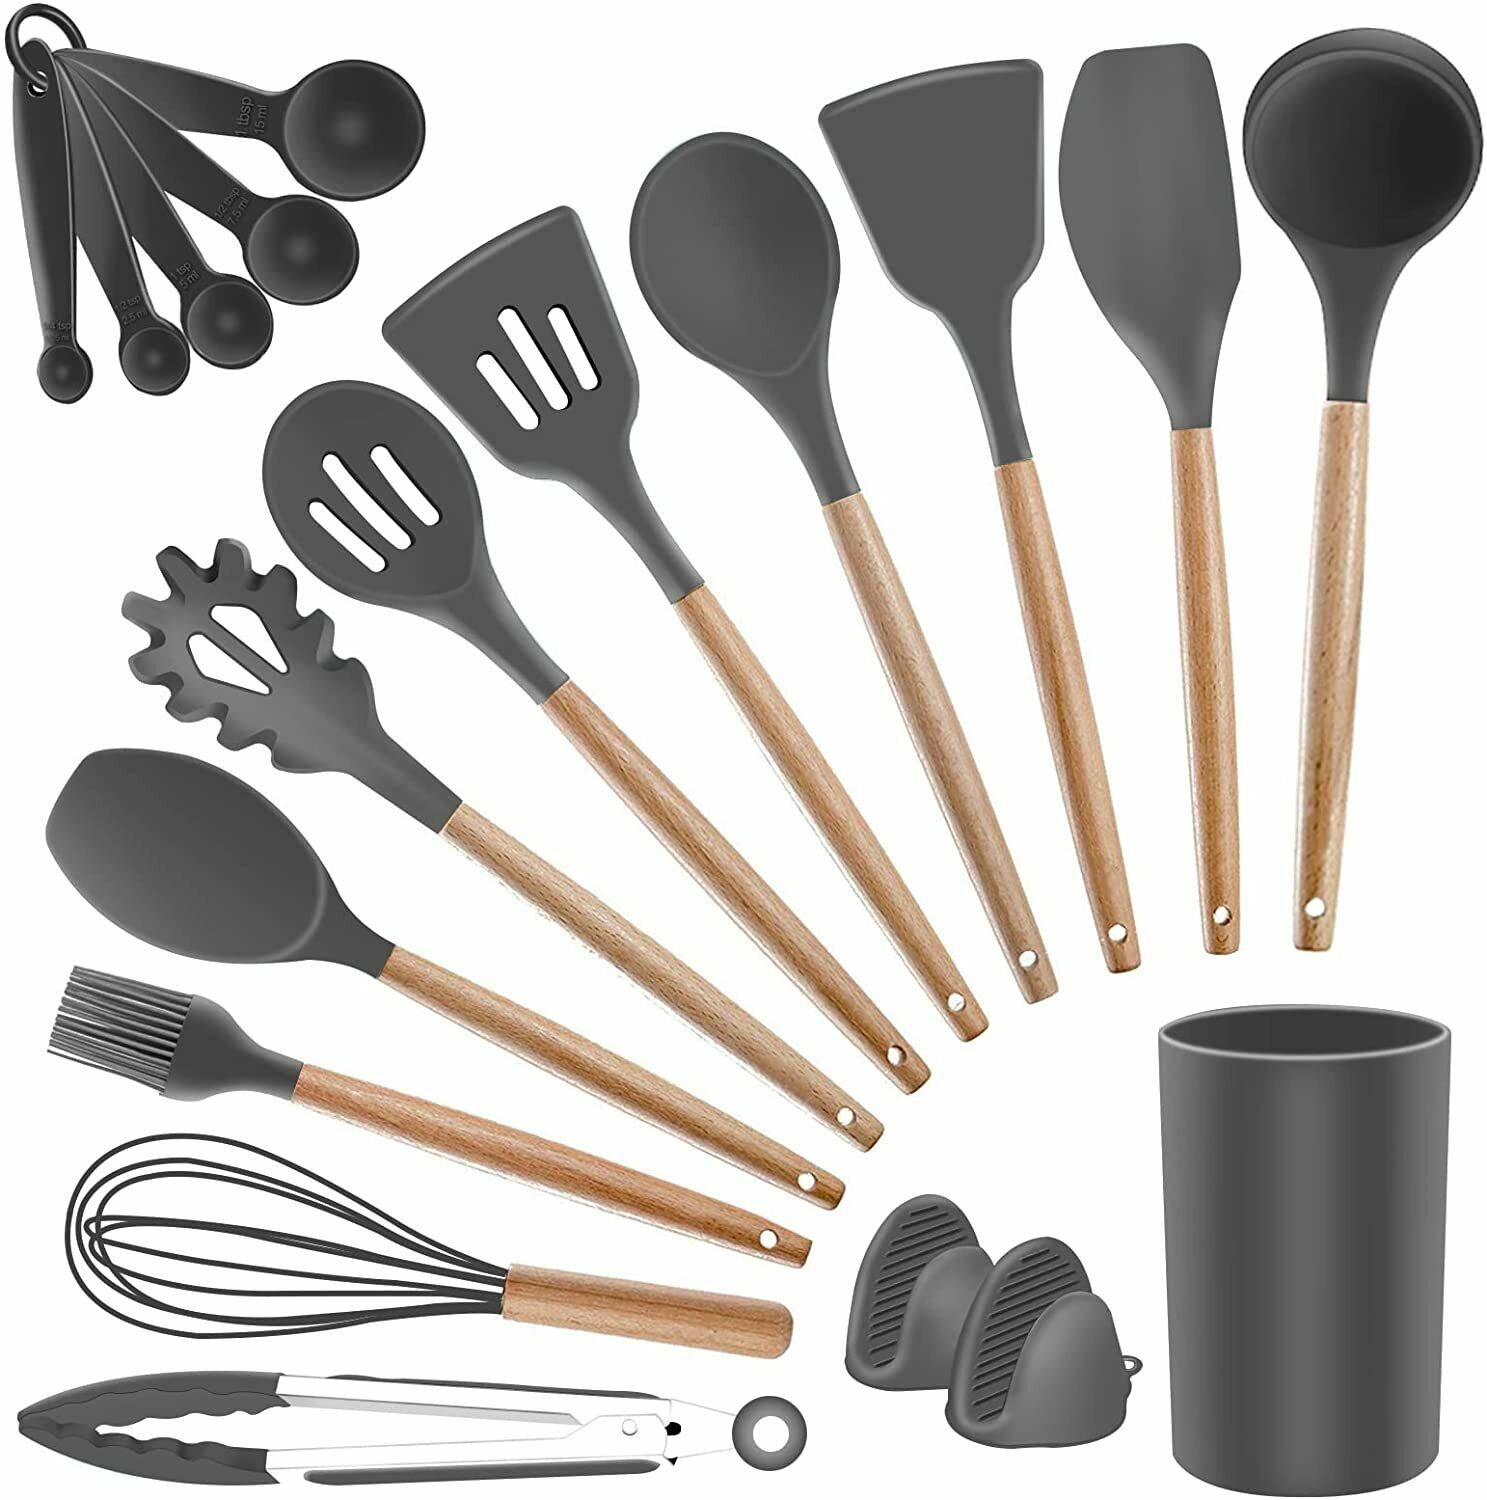 19 Pcs Silicone Kitchen Utensil Set with Holder, Heat Resistant Cooking Utensils